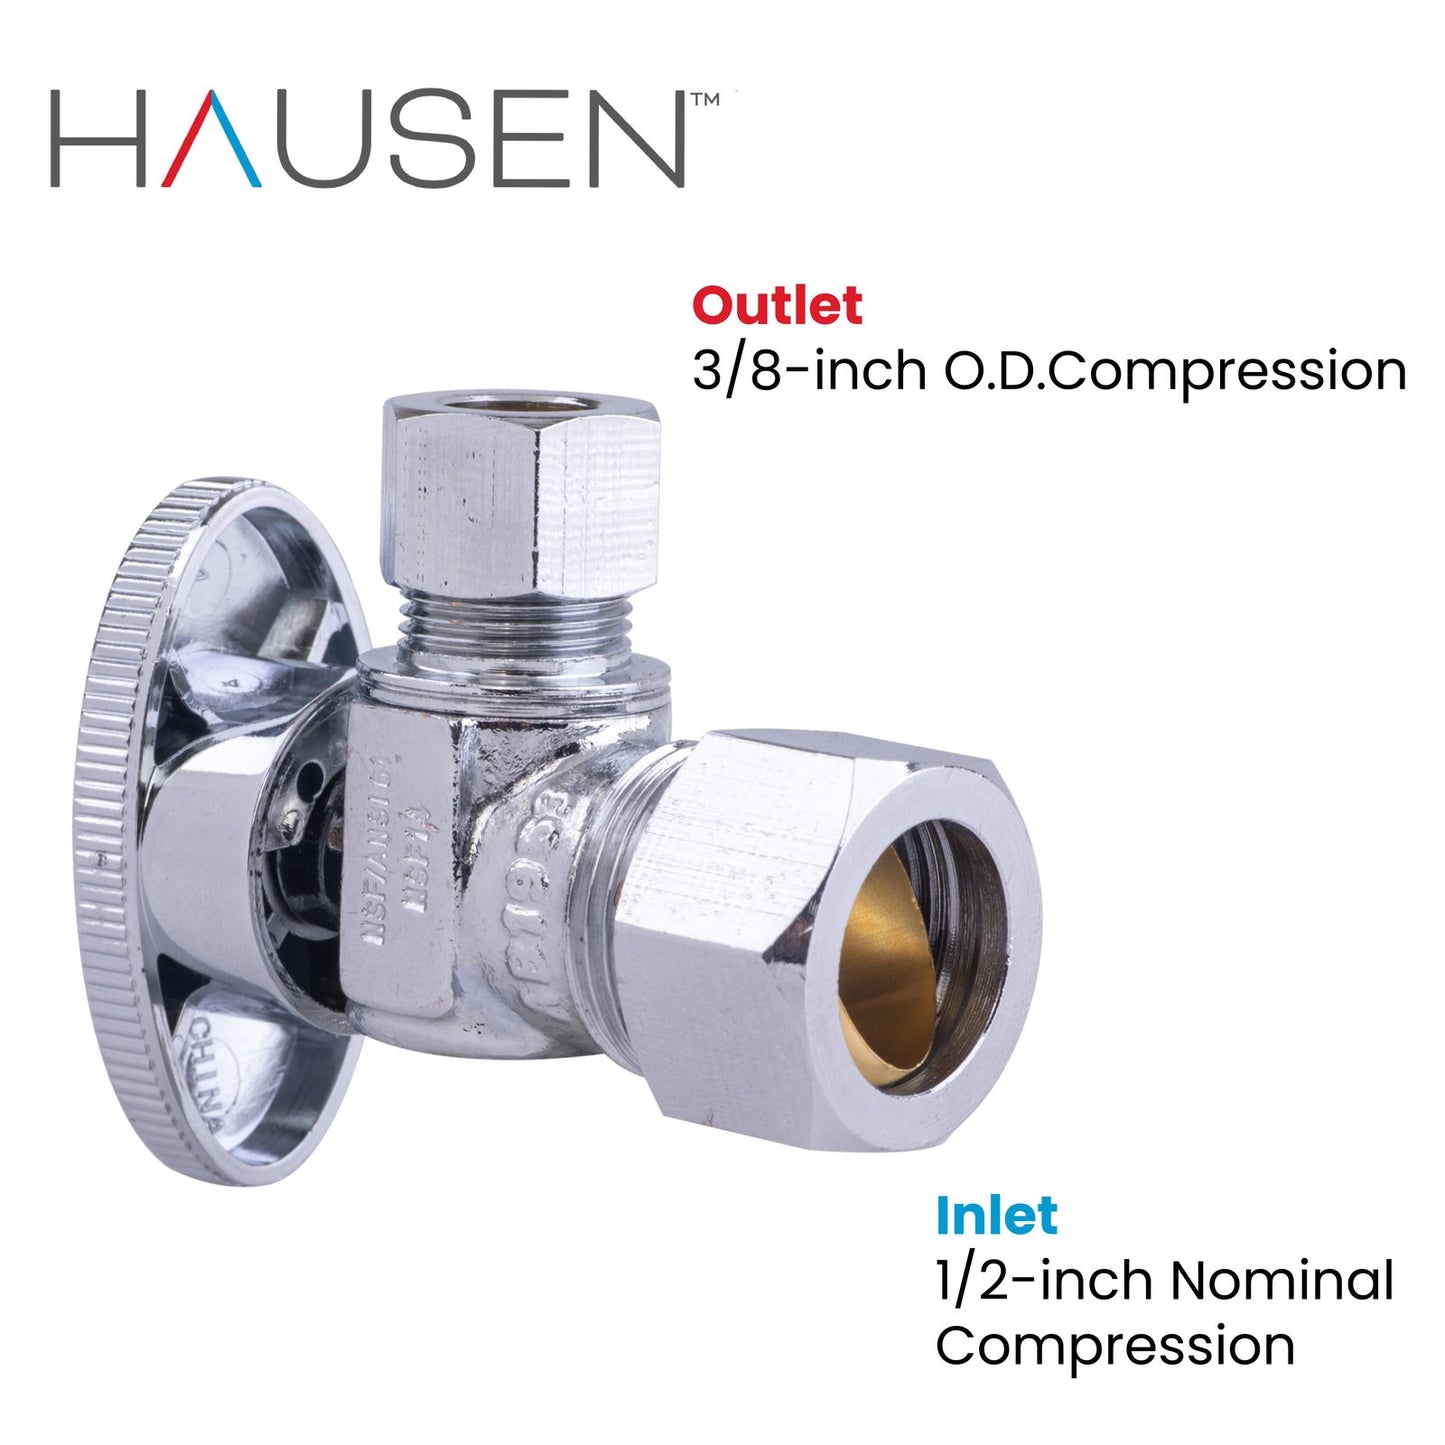 Hausen 1/2-inch Nominal Compression Inlet x 3/8-inch O.D. Compression Outlet 1/4-Turn Angle Water Stop; Lead-Free Forged Brass; Chrome-Plated; cUPC/ANSI/NSF Certified; Compatible with Copper Piping, 5-Pack